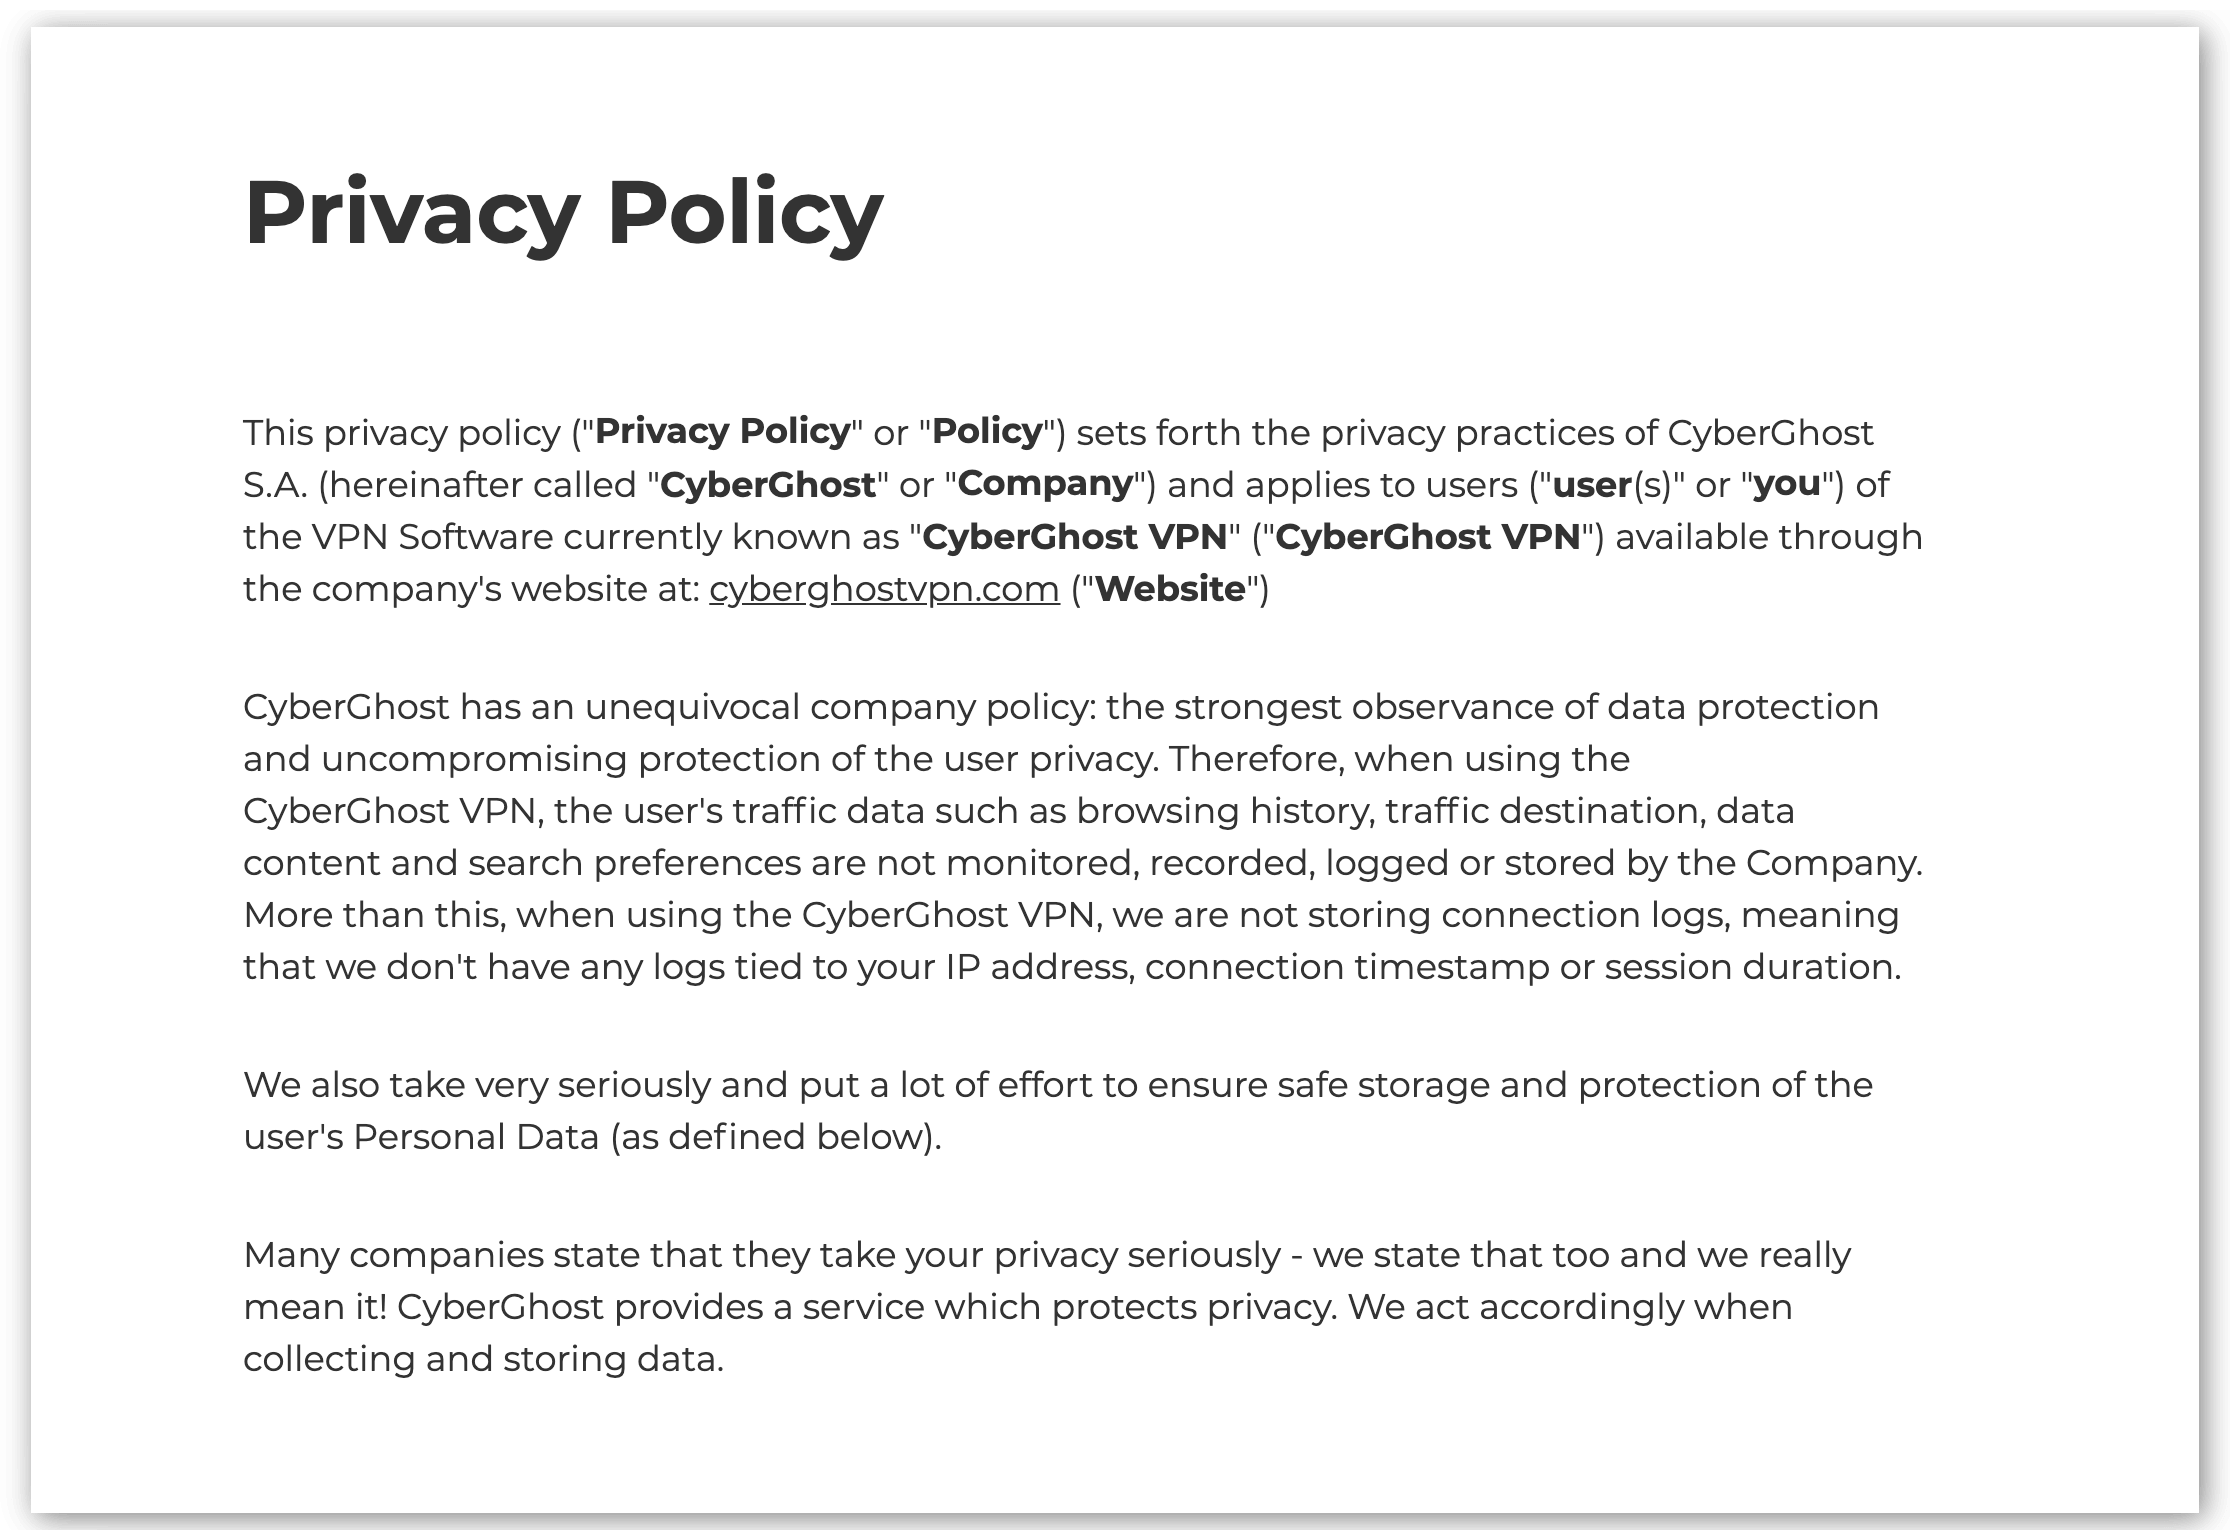 Screenshot of CyberGhost Privacy Policy